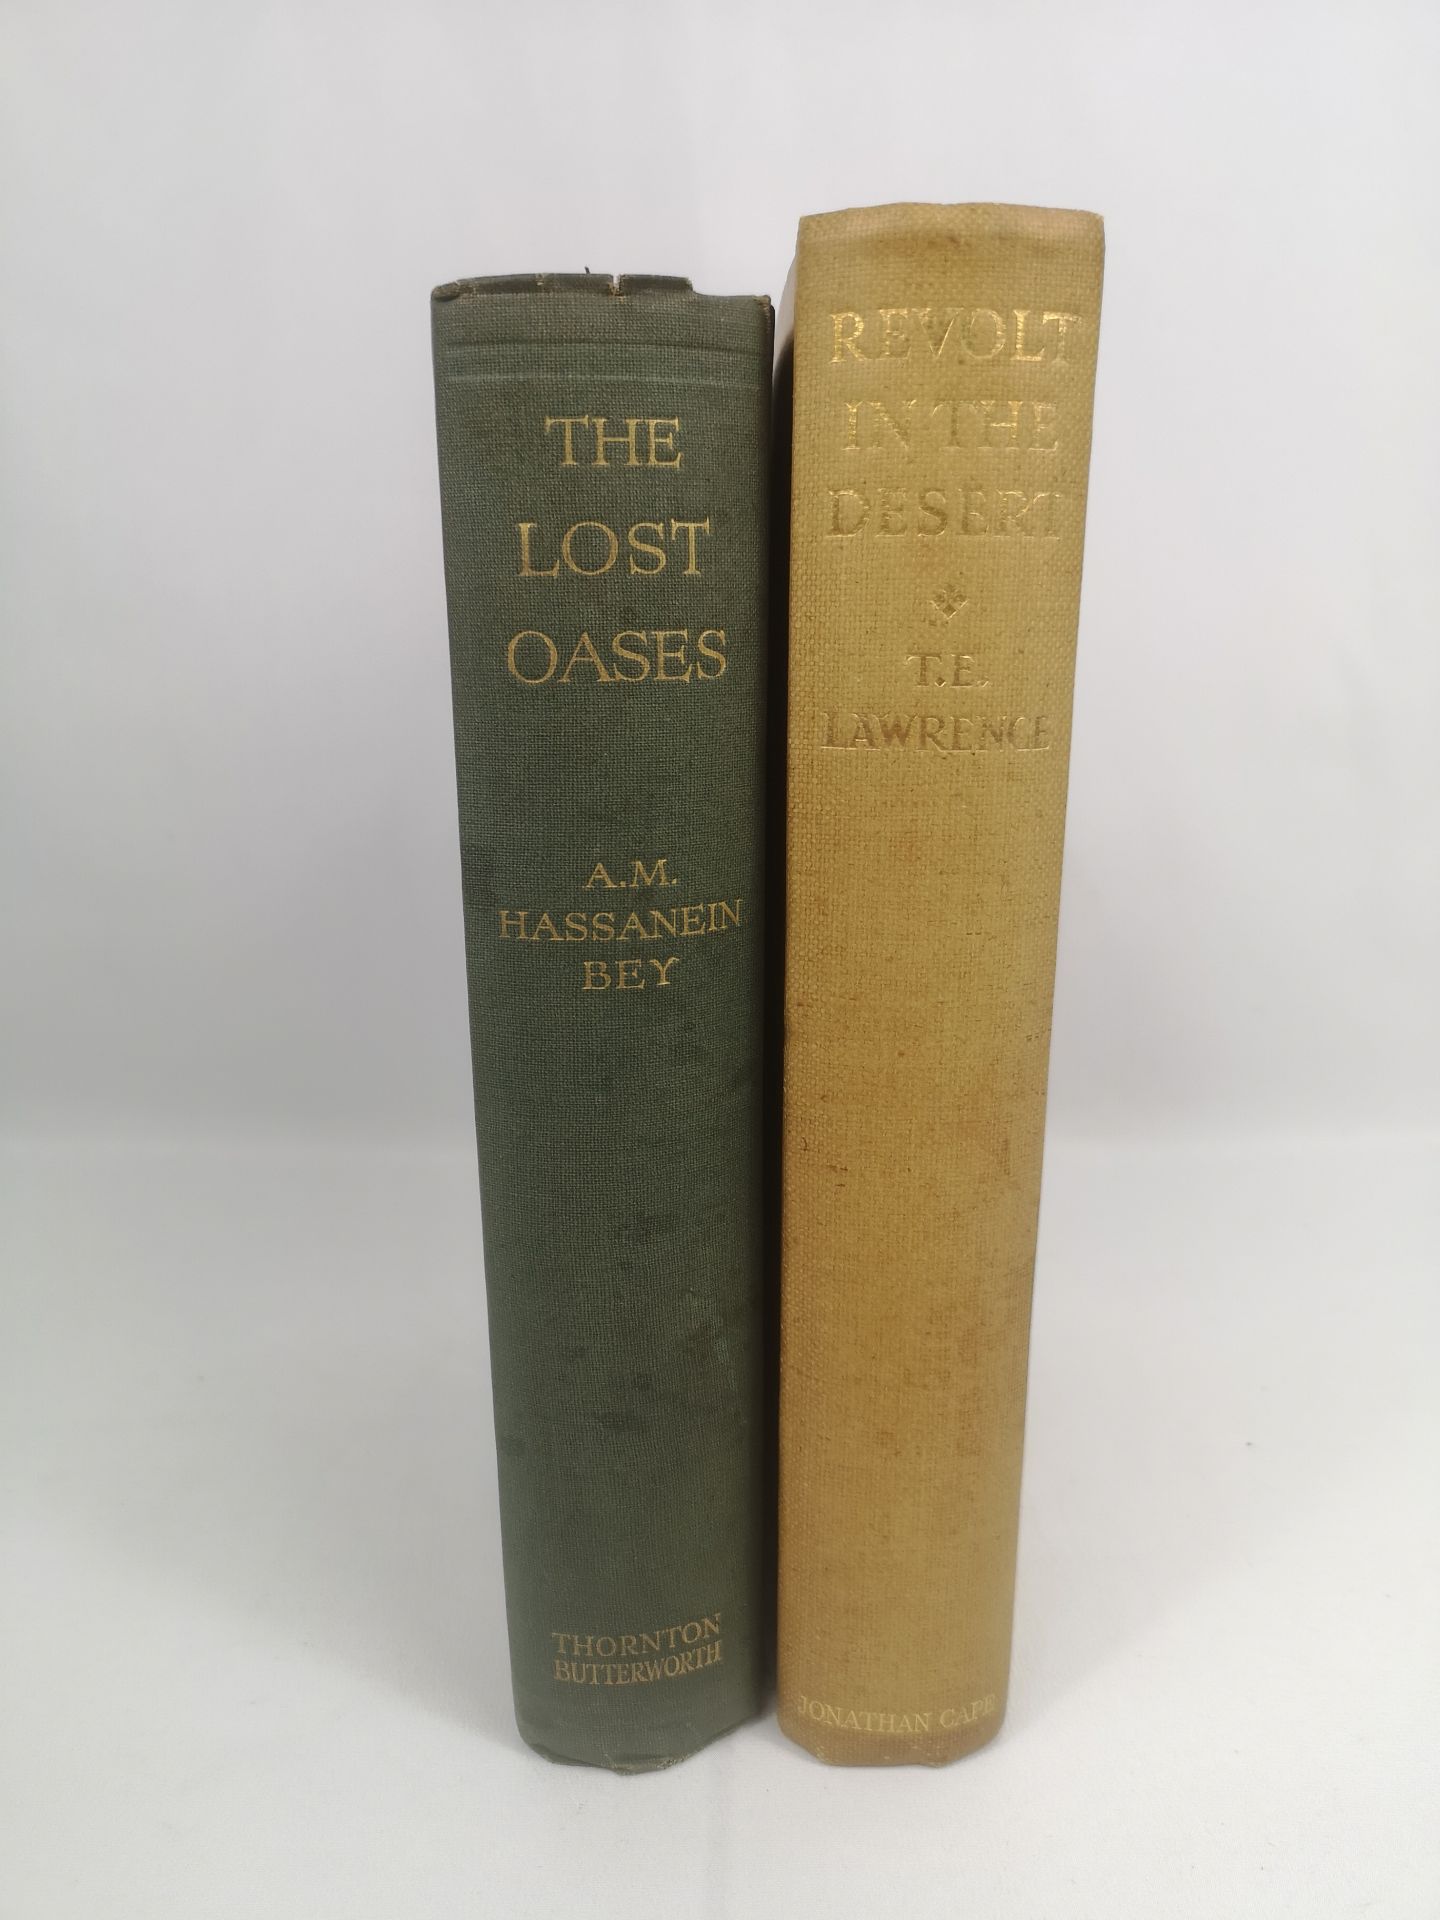 The Lost Oases by A.M.Hassanein Bey; together with Revolt in the Desert by T.E. Lawrence